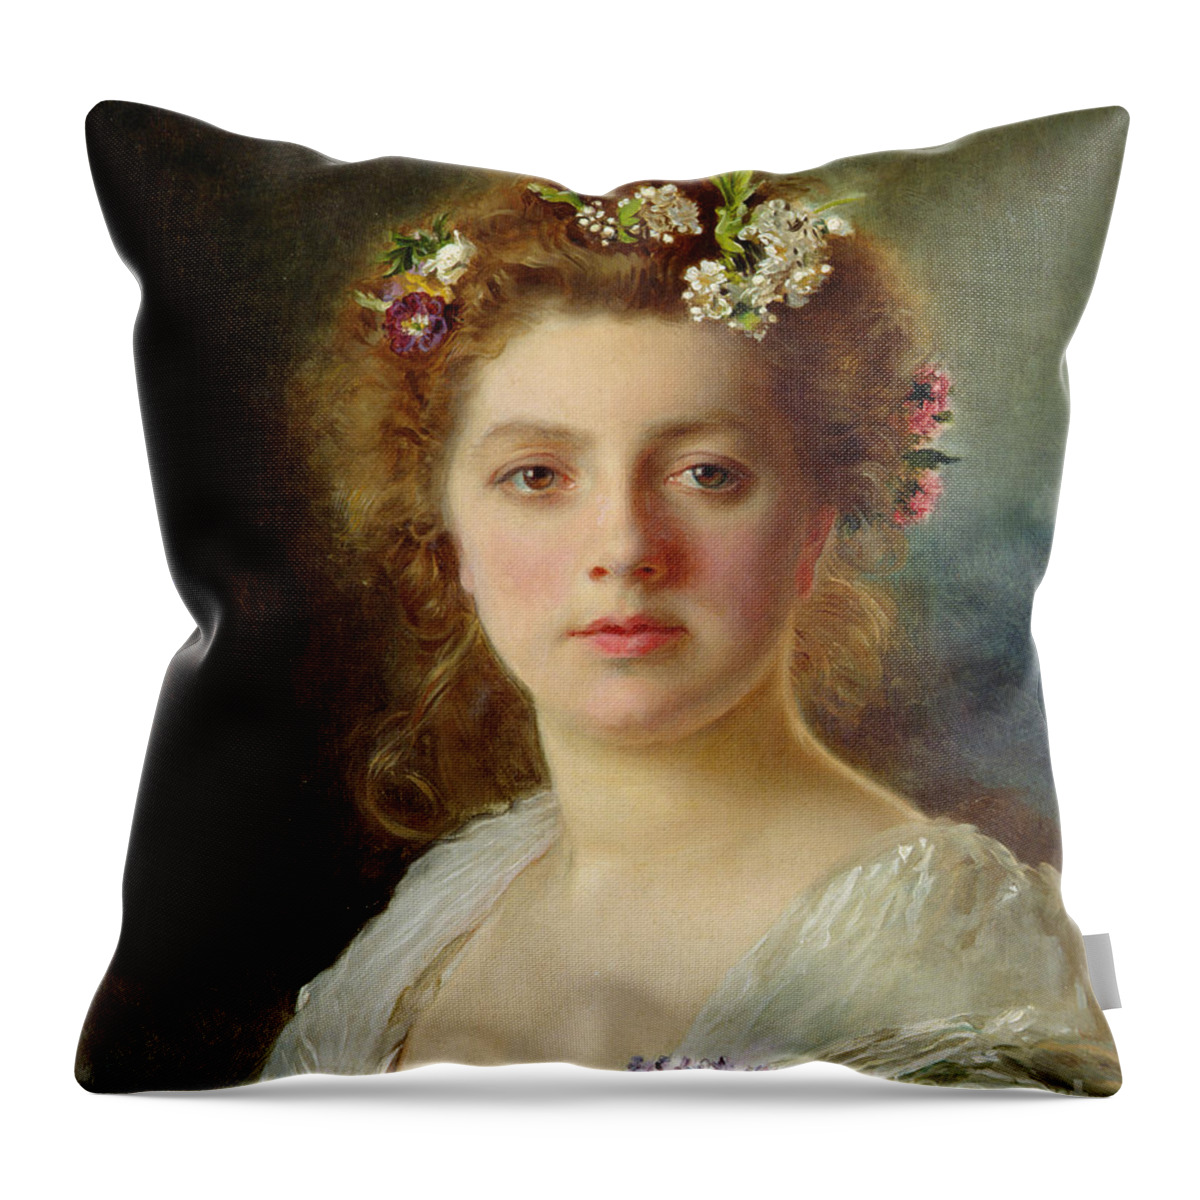 Female; Portrait; Flowers; Flower; Garland; Decollete; Beauty; Young; Rural; Tess; Hair; Regard; Staring; Woman; Gustave Jacquet Throw Pillow featuring the painting Flora by Gustave Jacquet